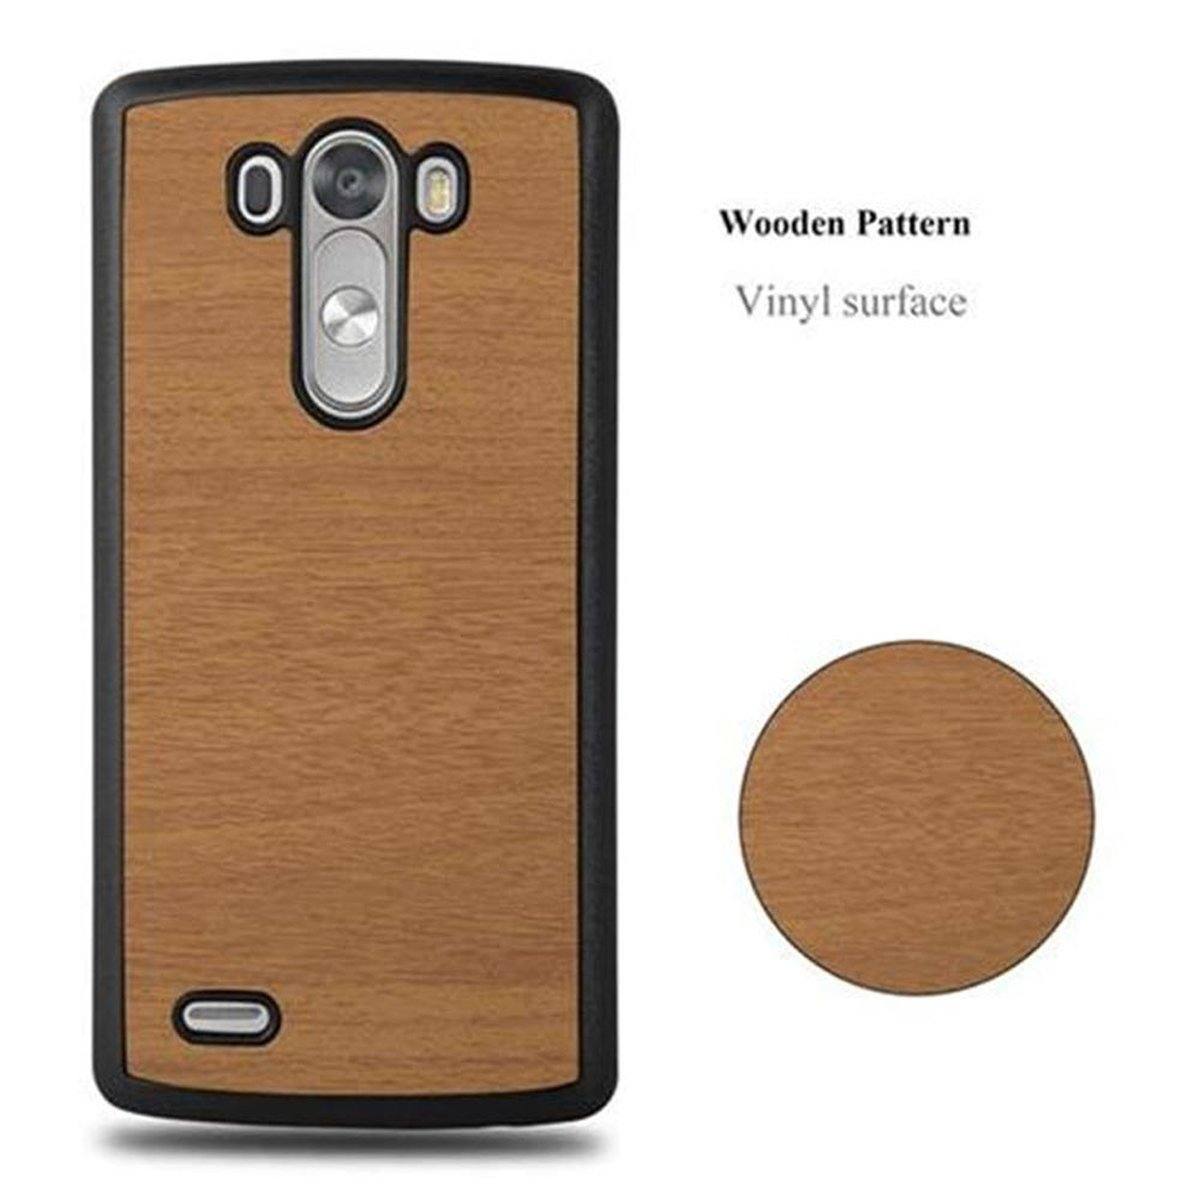 Backcover, CADORABO Hard G3, Style, WOODY BRAUN LG, Woody Hülle Case